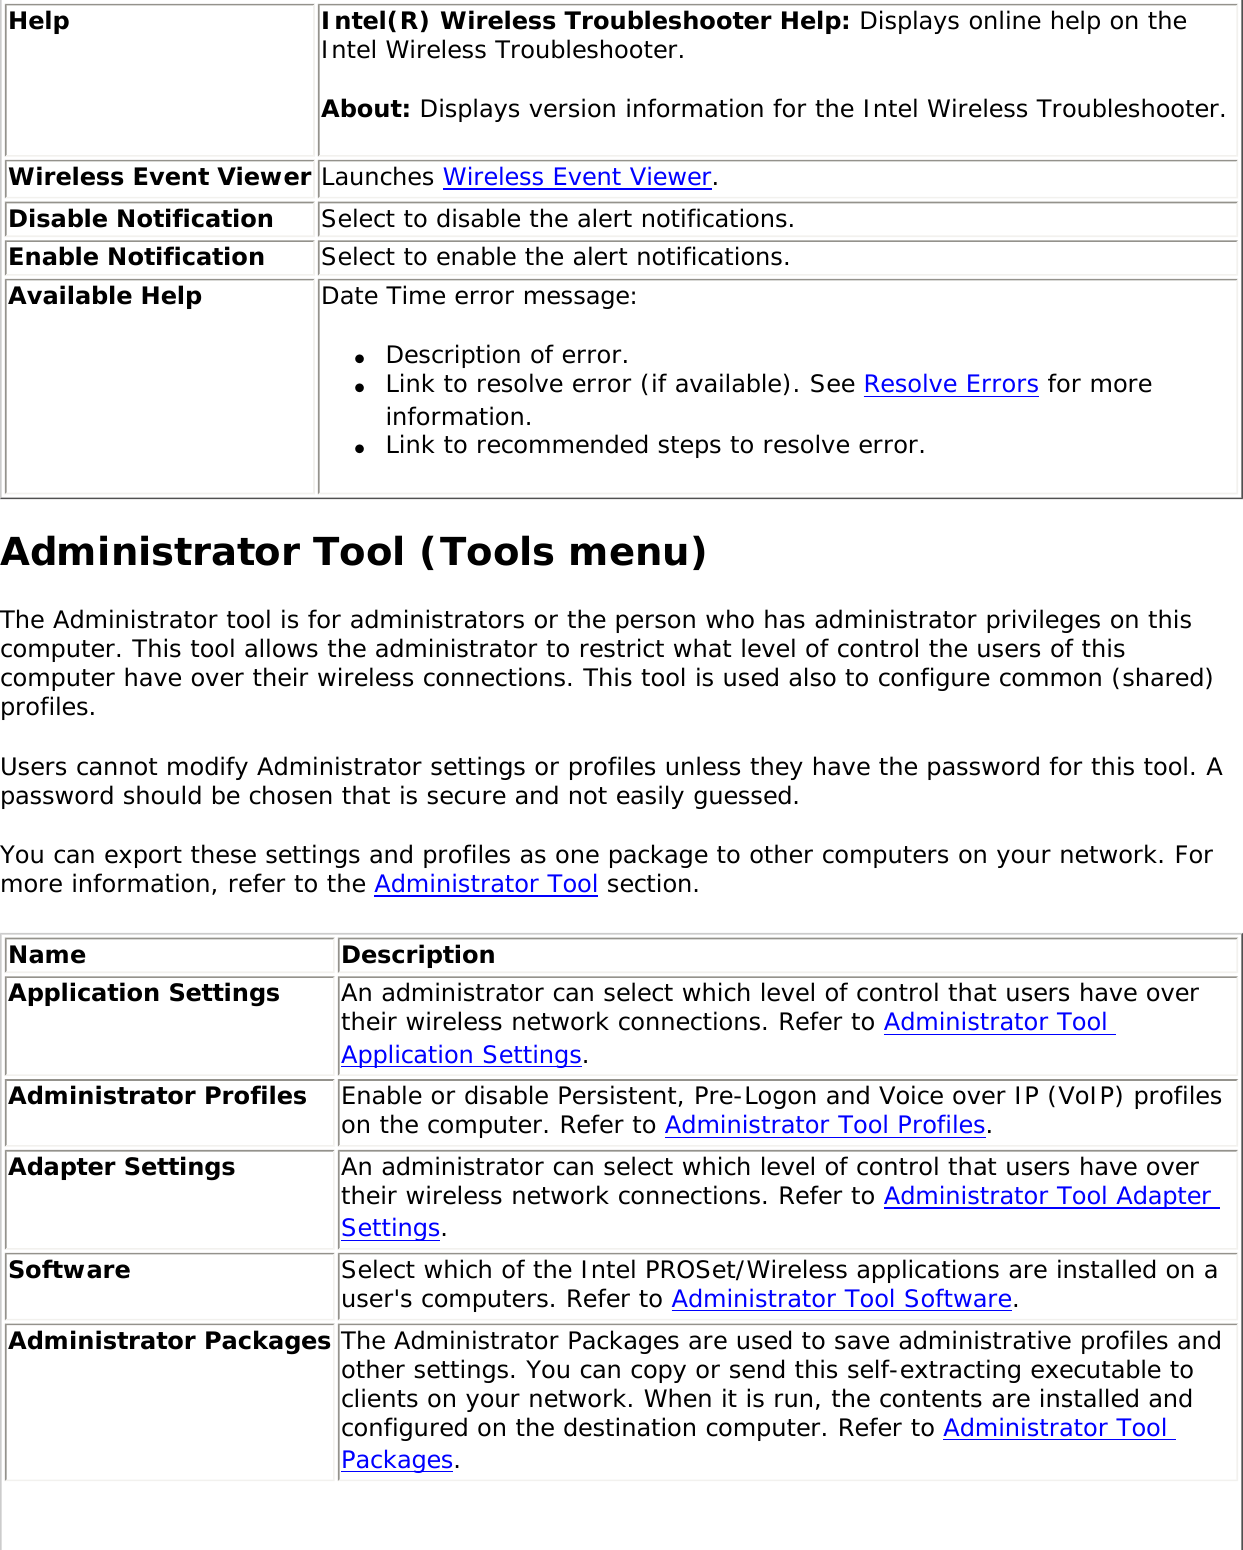 Help Intel(R) Wireless Troubleshooter Help: Displays online help on the Intel Wireless Troubleshooter. About: Displays version information for the Intel Wireless Troubleshooter.  Wireless Event Viewer Launches Wireless Event Viewer.Disable Notification Select to disable the alert notifications.  Enable Notification Select to enable the alert notifications.Available Help Date Time error message: ●     Description of error.●     Link to resolve error (if available). See Resolve Errors for more information.●     Link to recommended steps to resolve error.Administrator Tool (Tools menu)The Administrator tool is for administrators or the person who has administrator privileges on this computer. This tool allows the administrator to restrict what level of control the users of this computer have over their wireless connections. This tool is used also to configure common (shared) profiles. Users cannot modify Administrator settings or profiles unless they have the password for this tool. A password should be chosen that is secure and not easily guessed. You can export these settings and profiles as one package to other computers on your network. For more information, refer to the Administrator Tool section. Name DescriptionApplication Settings An administrator can select which level of control that users have over their wireless network connections. Refer to Administrator Tool Application Settings. Administrator Profiles Enable or disable Persistent, Pre-Logon and Voice over IP (VoIP) profiles on the computer. Refer to Administrator Tool Profiles. Adapter Settings  An administrator can select which level of control that users have over their wireless network connections. Refer to Administrator Tool Adapter Settings. Software Select which of the Intel PROSet/Wireless applications are installed on a user&apos;s computers. Refer to Administrator Tool Software. Administrator Packages The Administrator Packages are used to save administrative profiles and other settings. You can copy or send this self-extracting executable to clients on your network. When it is run, the contents are installed and configured on the destination computer. Refer to Administrator Tool Packages.